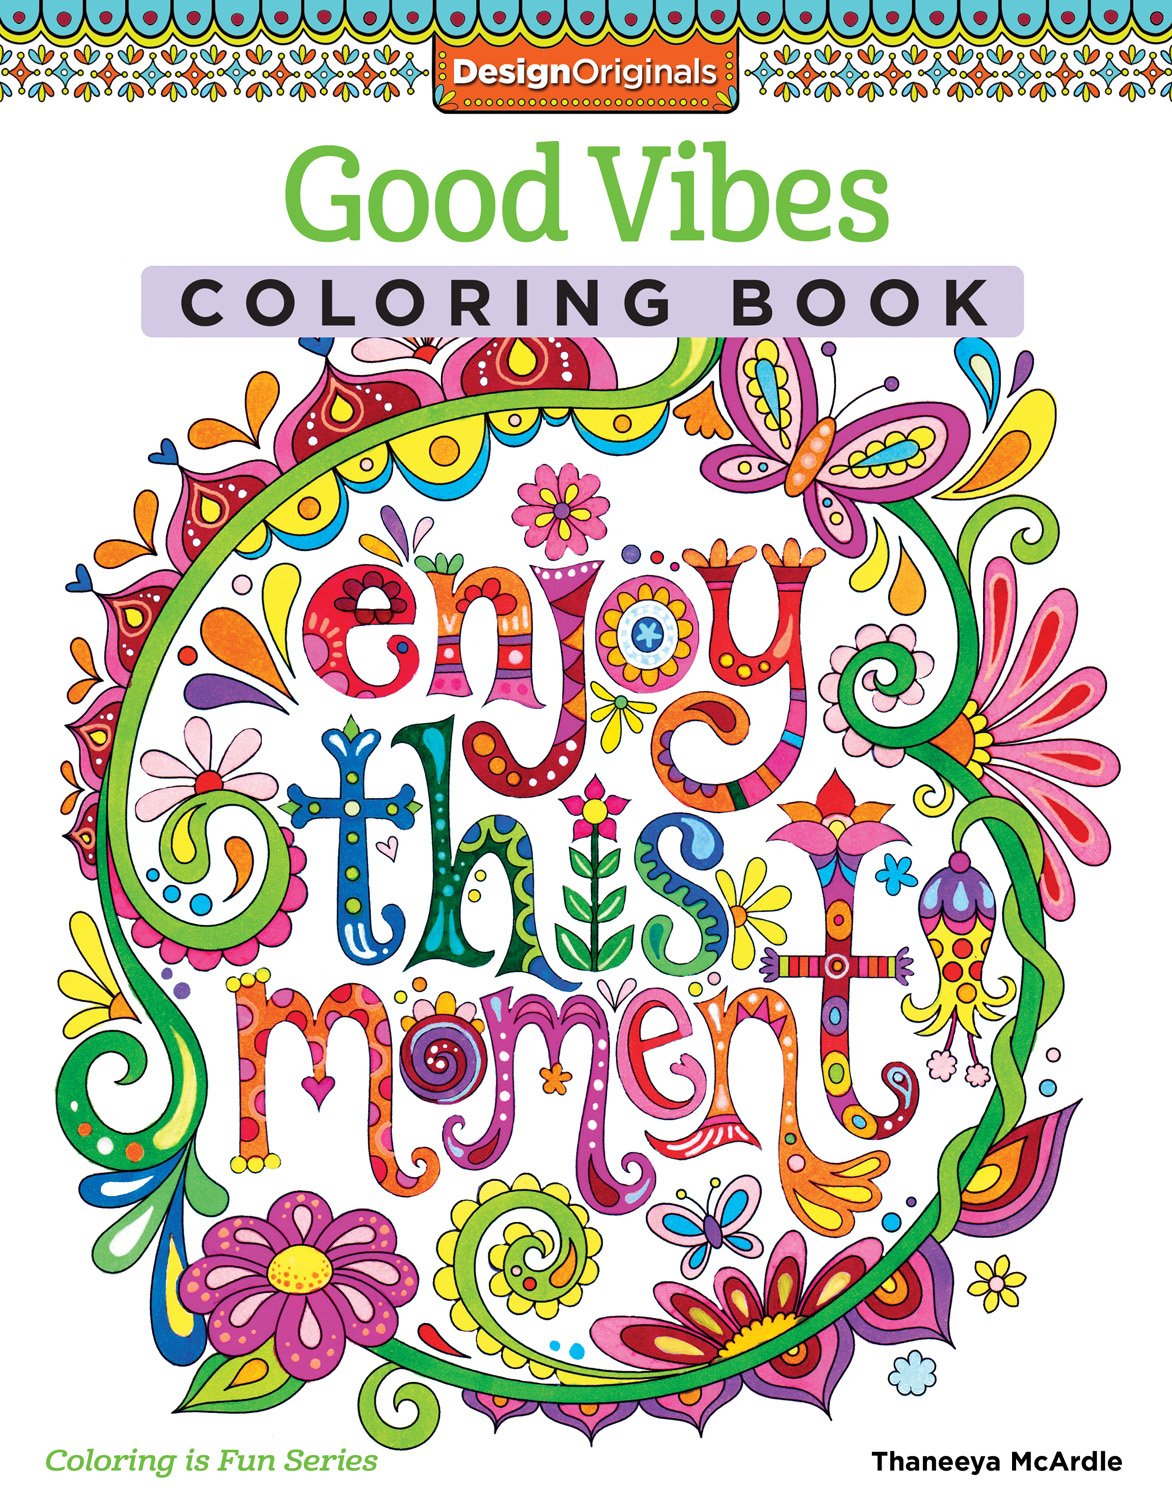 Good Vibes Adult Coloring book from Amazon